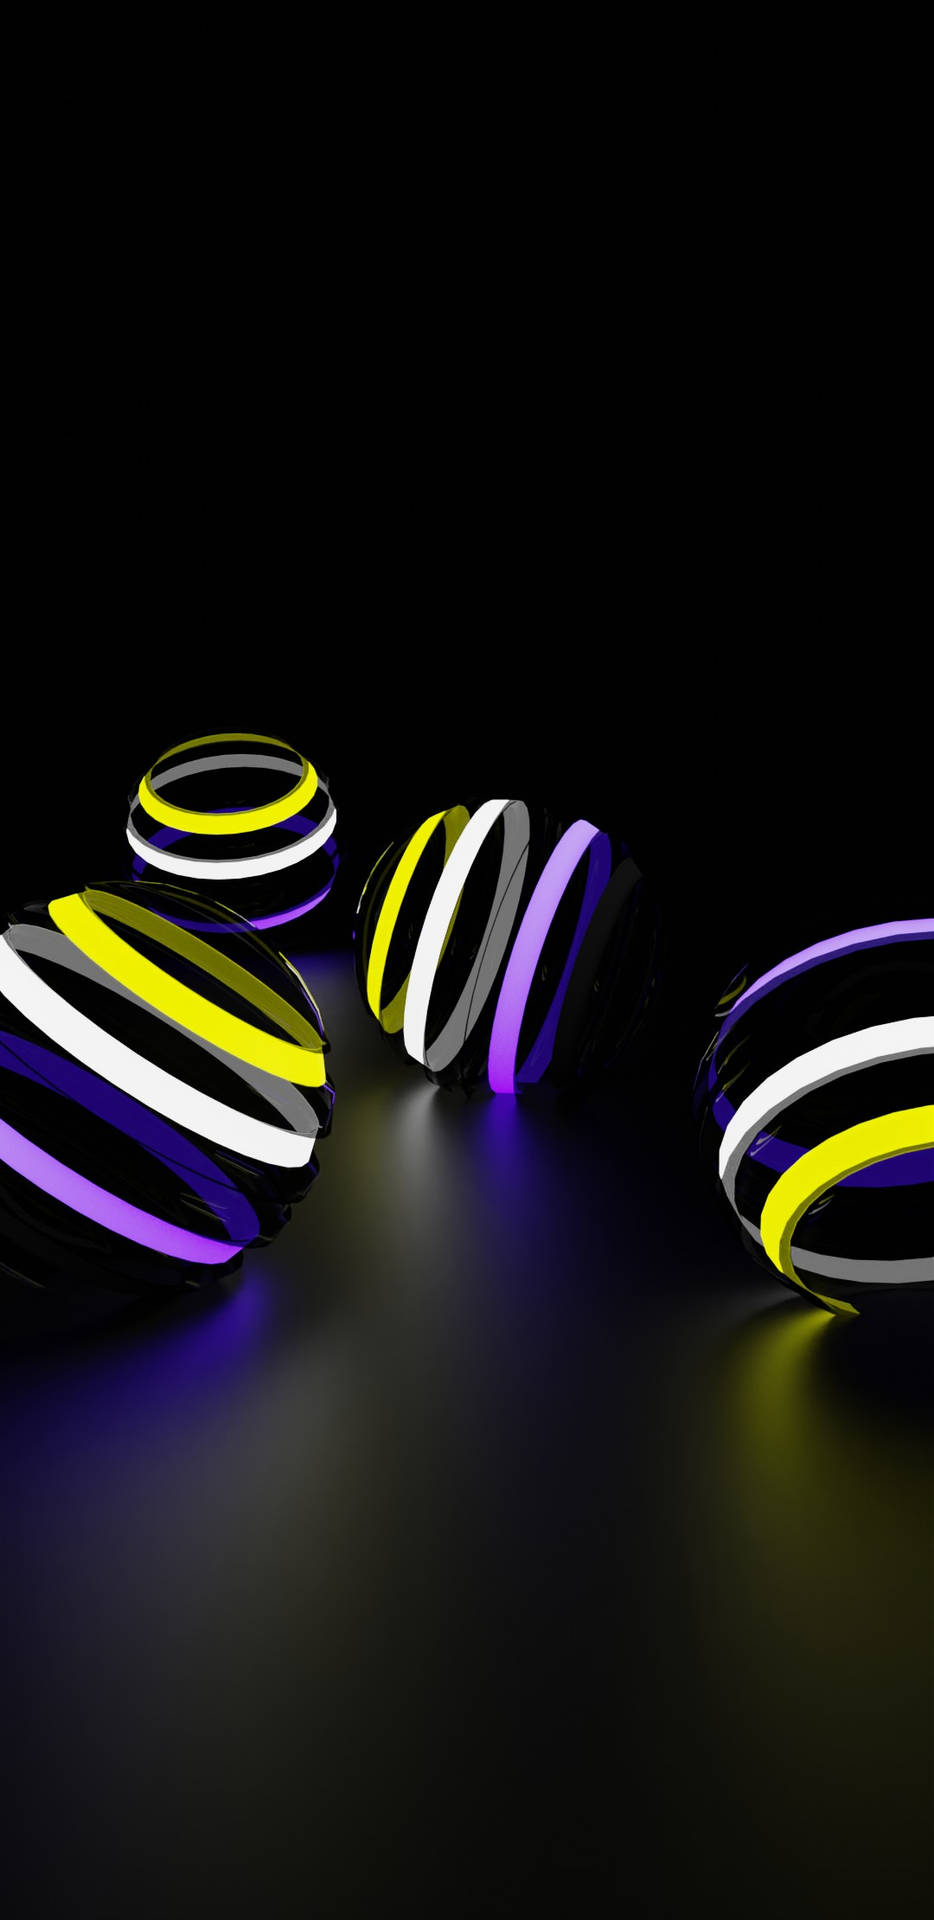 A Black Background With Several Colorful Rings Wallpaper